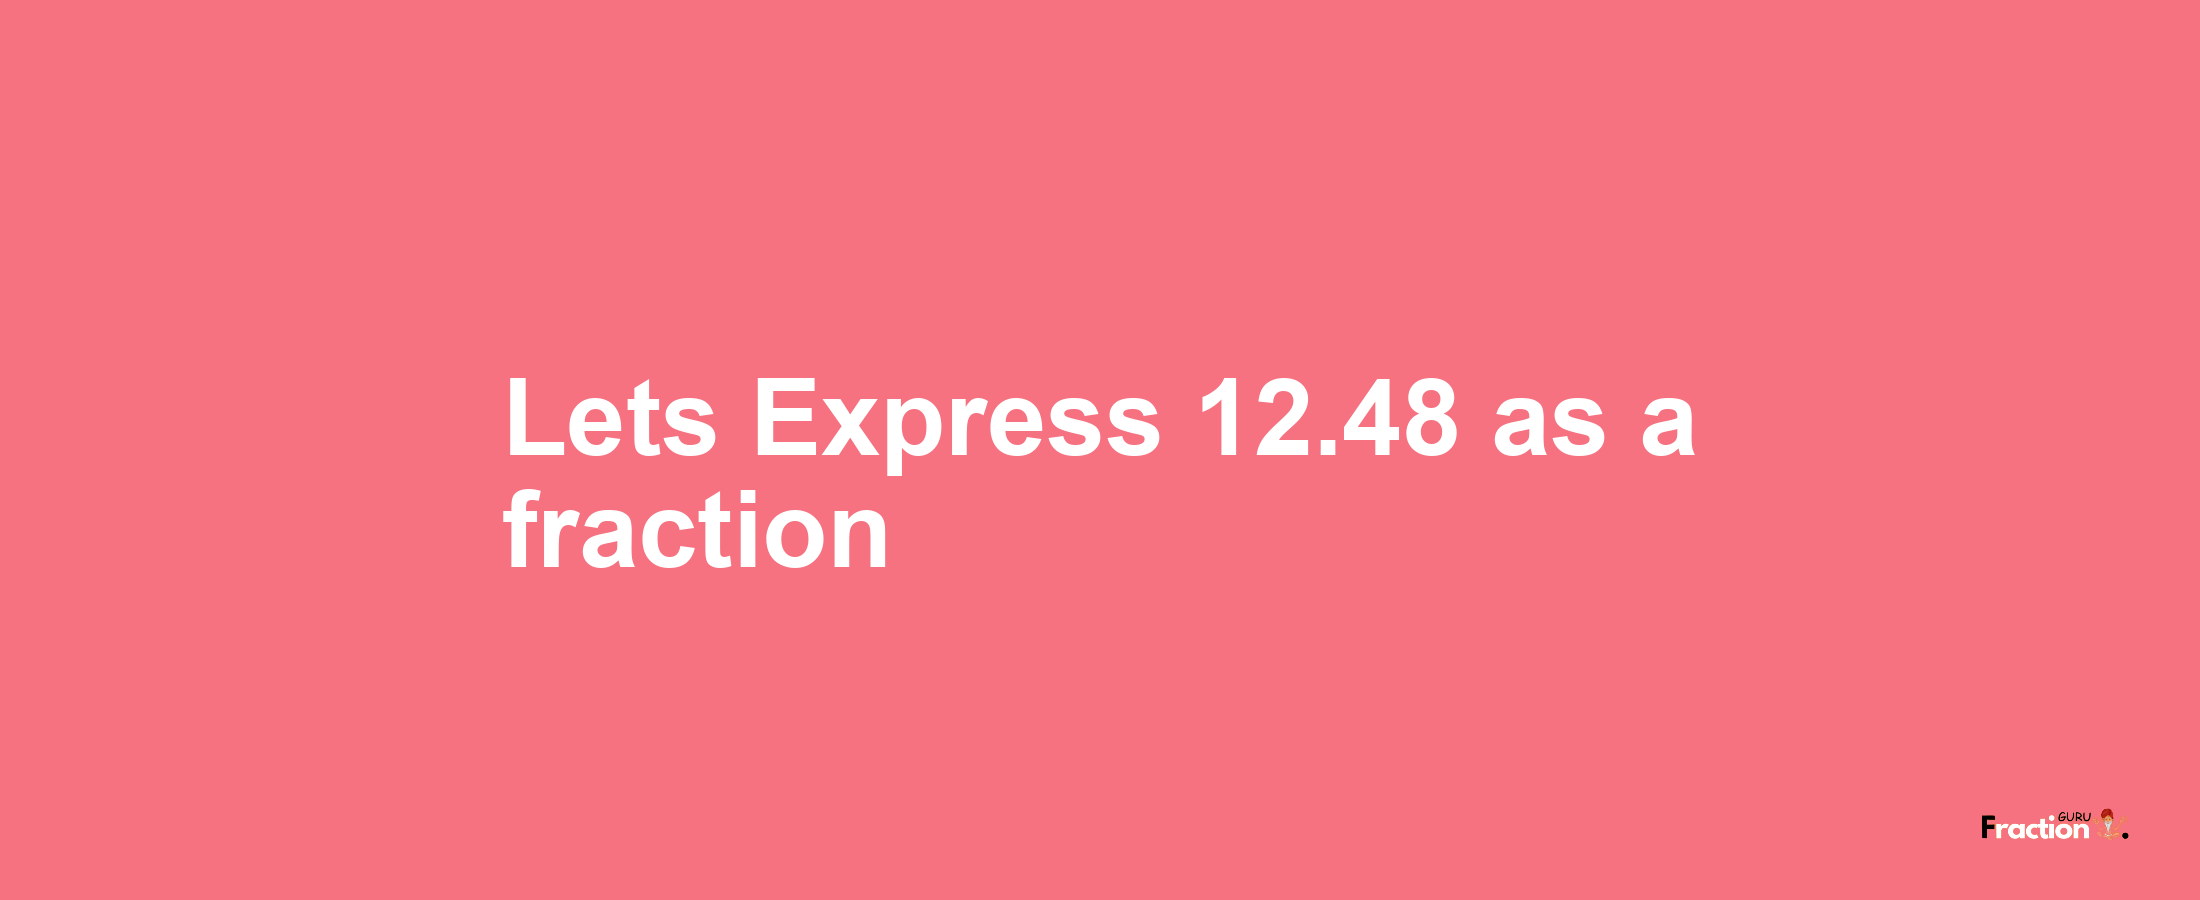 Lets Express 12.48 as afraction